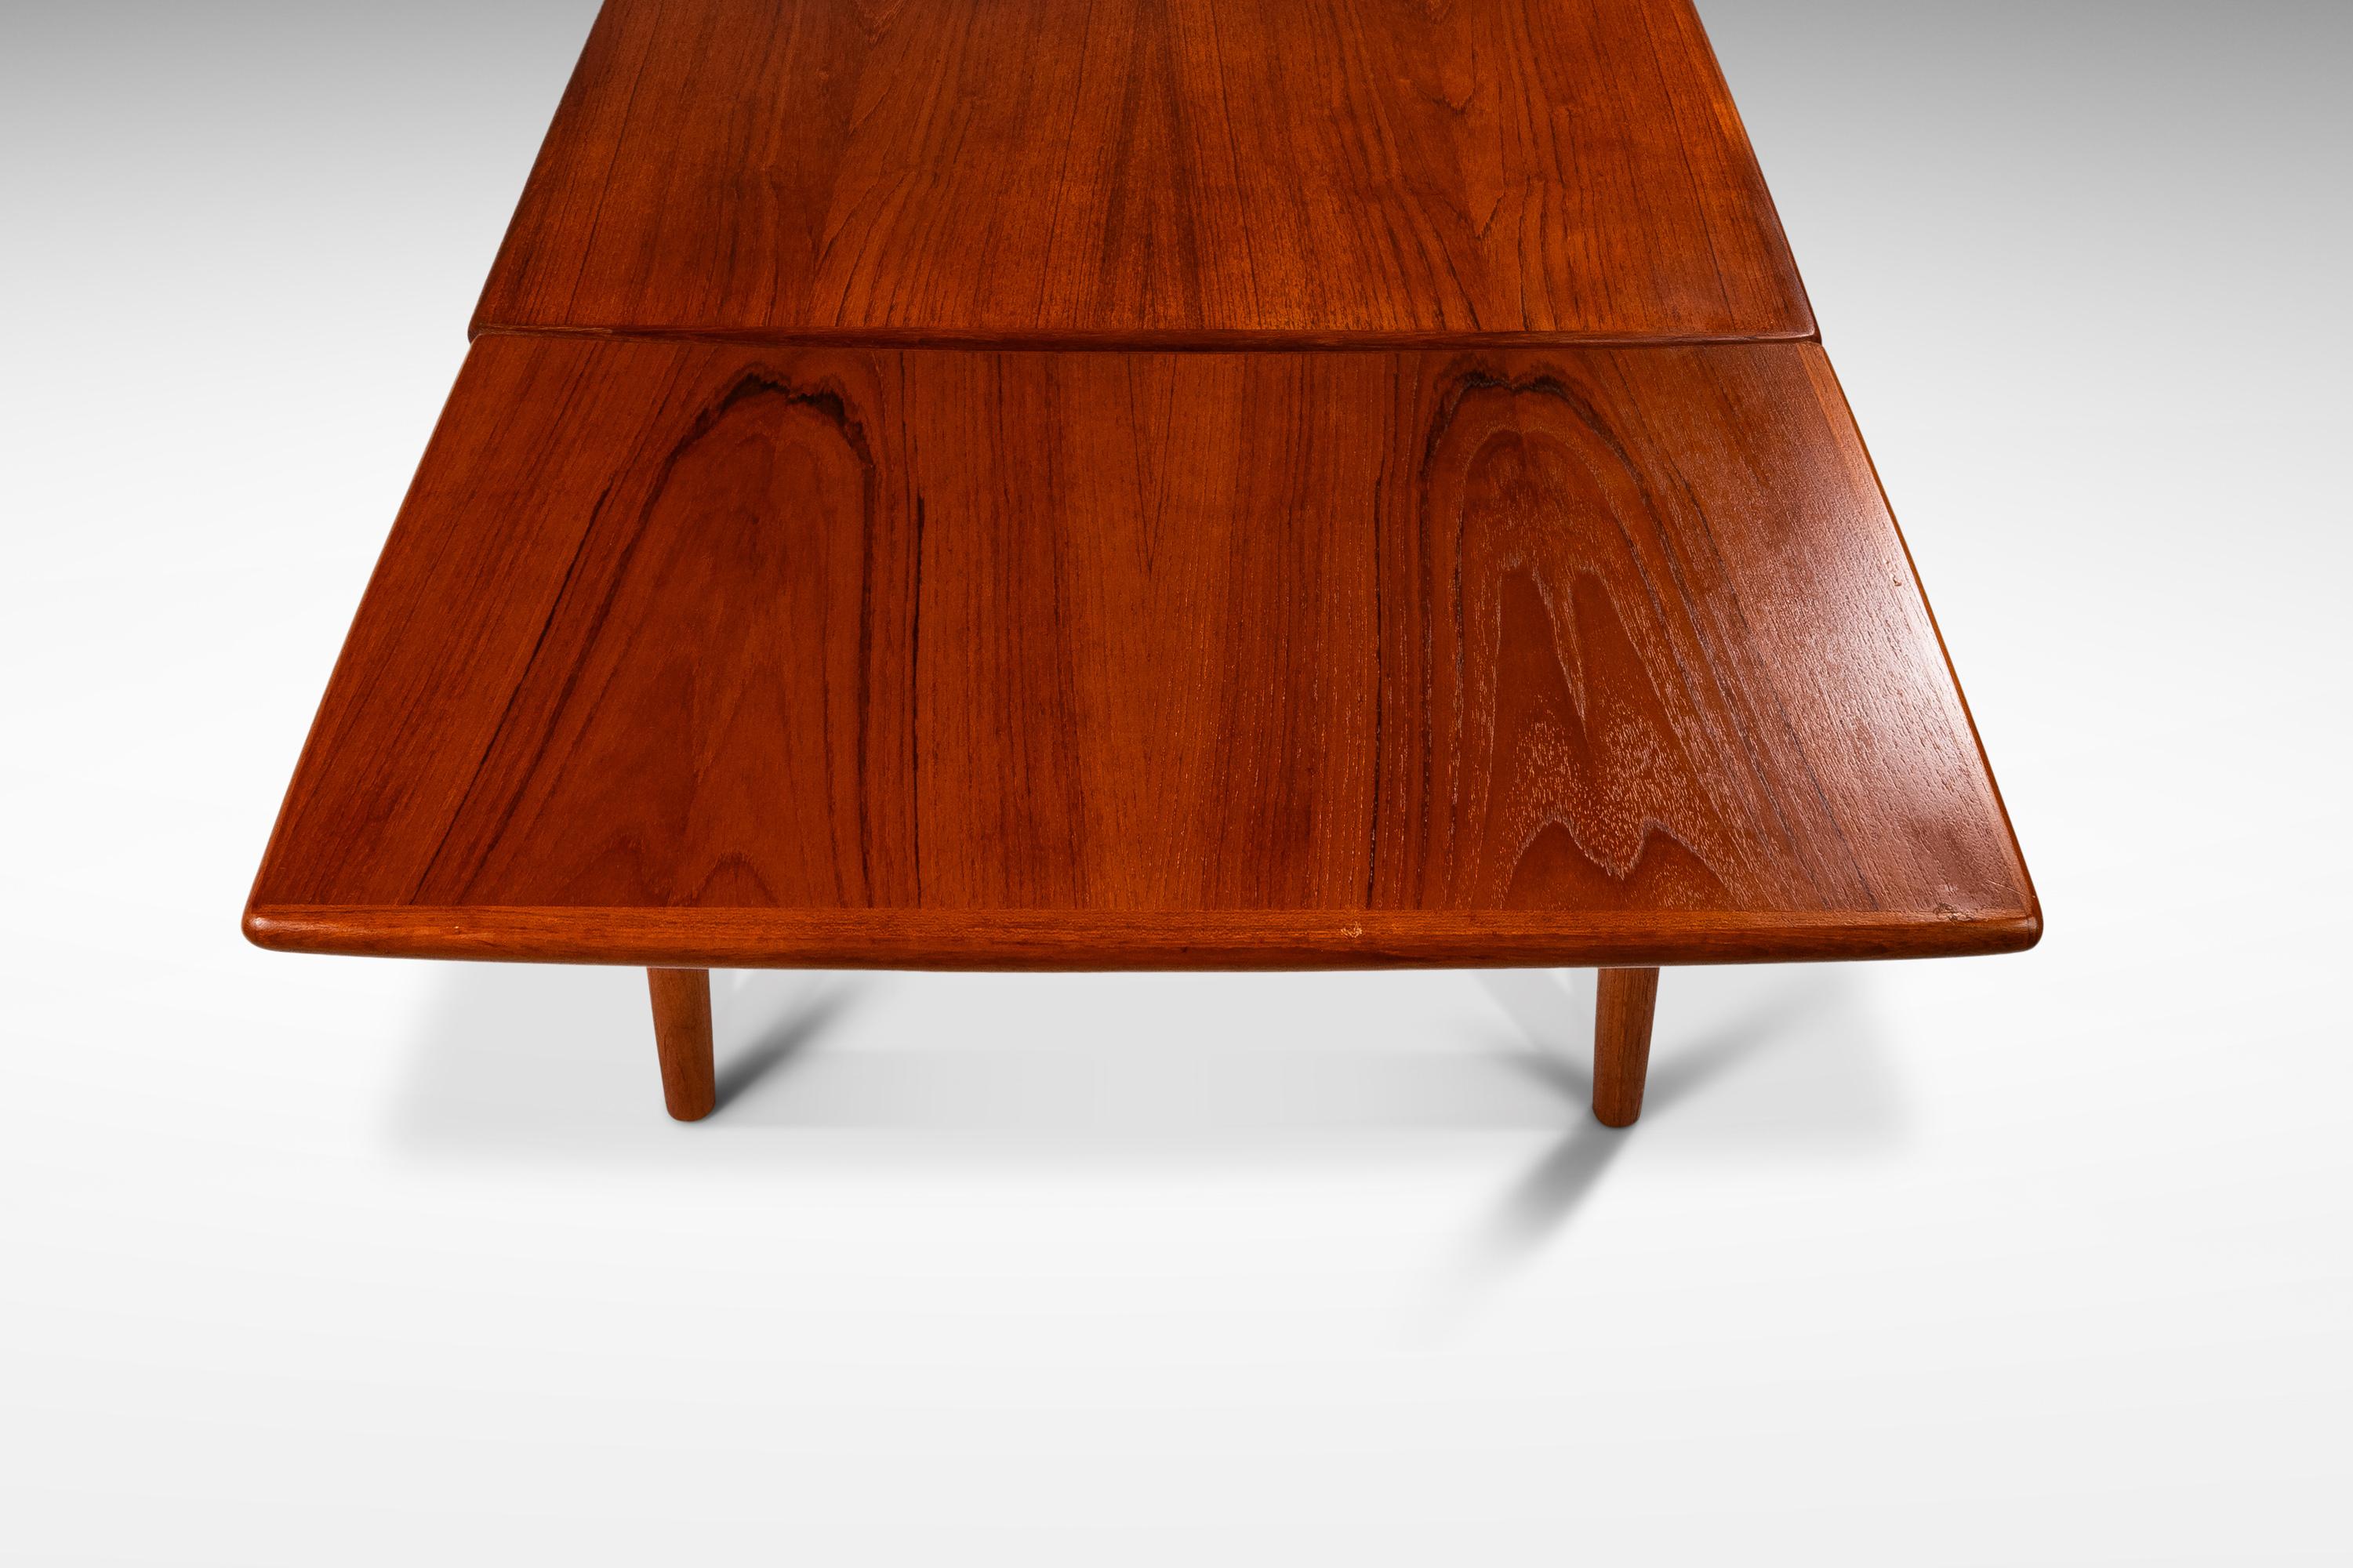 Danish Modern Expansion Dining Table in Teak w/ Stow-In-Table Leaves, c. 1960s For Sale 1